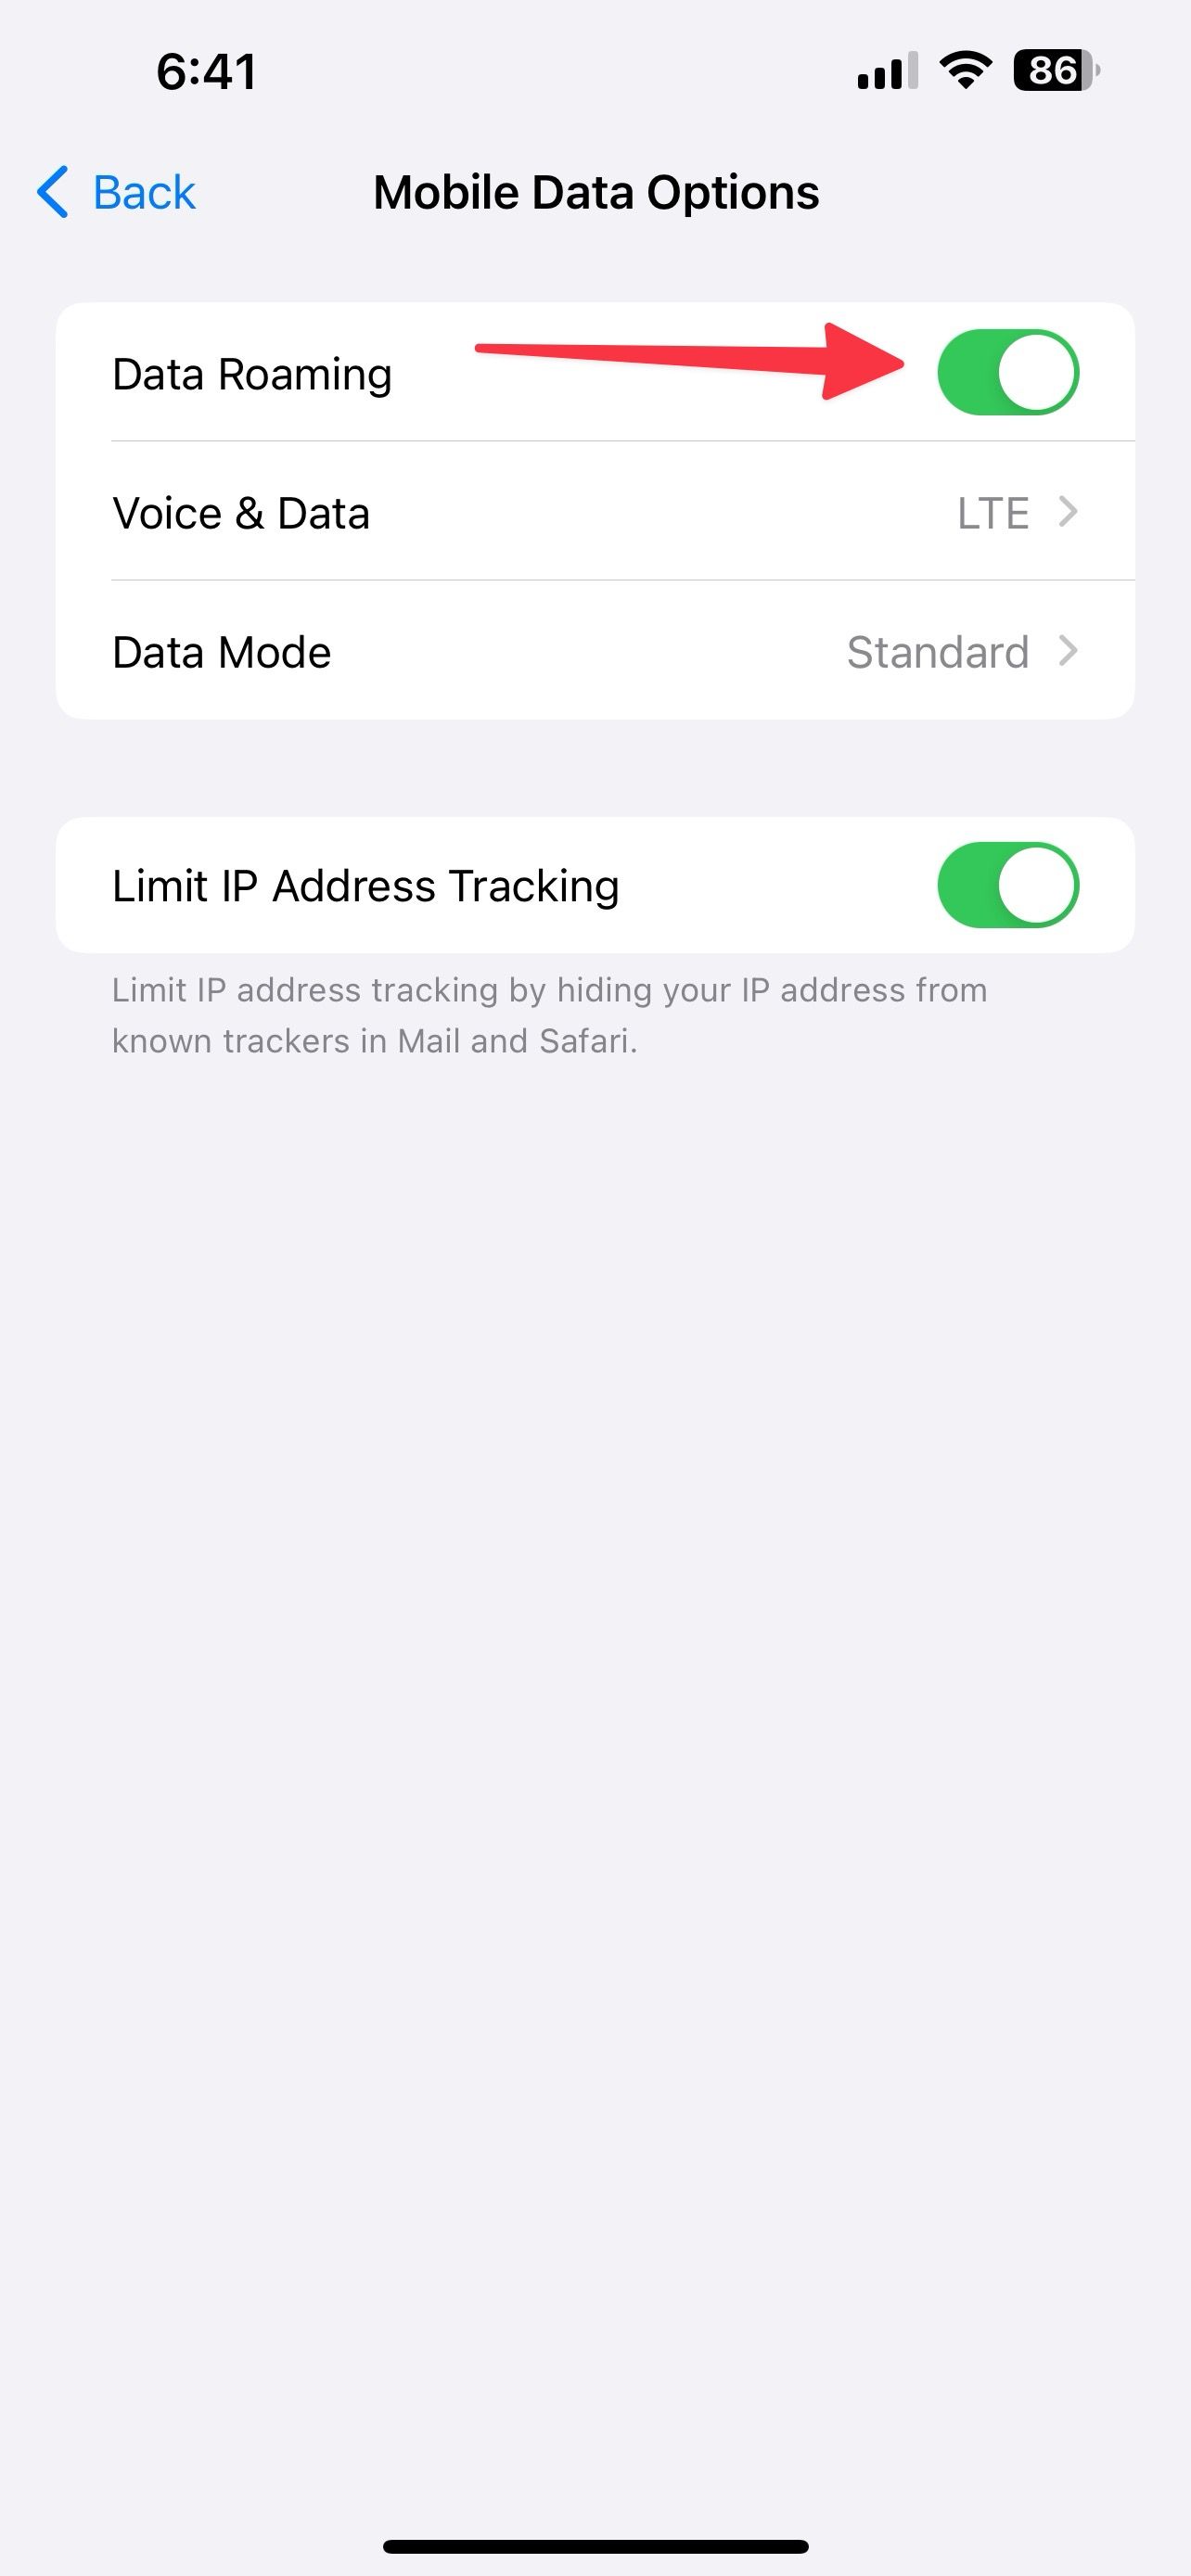 activate data roaming on iPhone